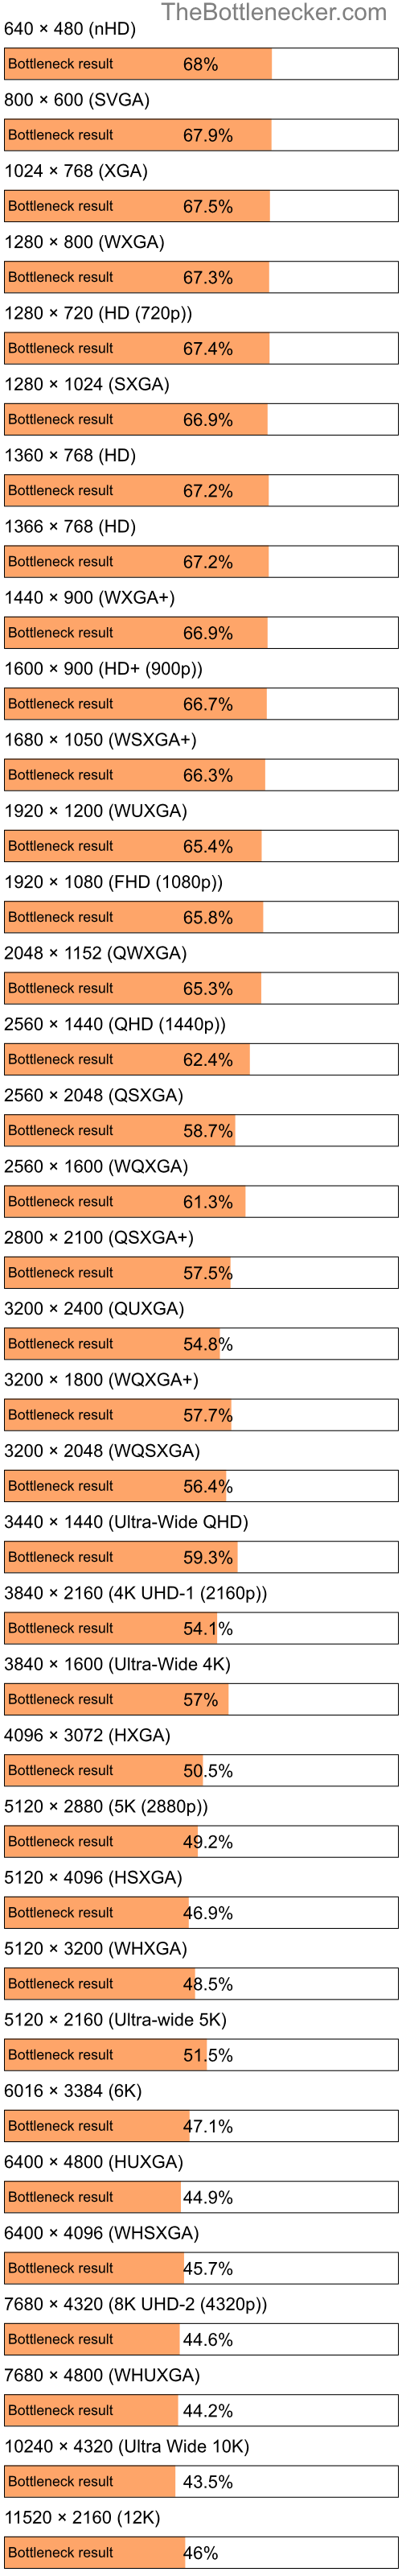 Bottleneck results by resolution for Intel Core i5-6500 and NVIDIA GeForce RTX 4080 in General Tasks